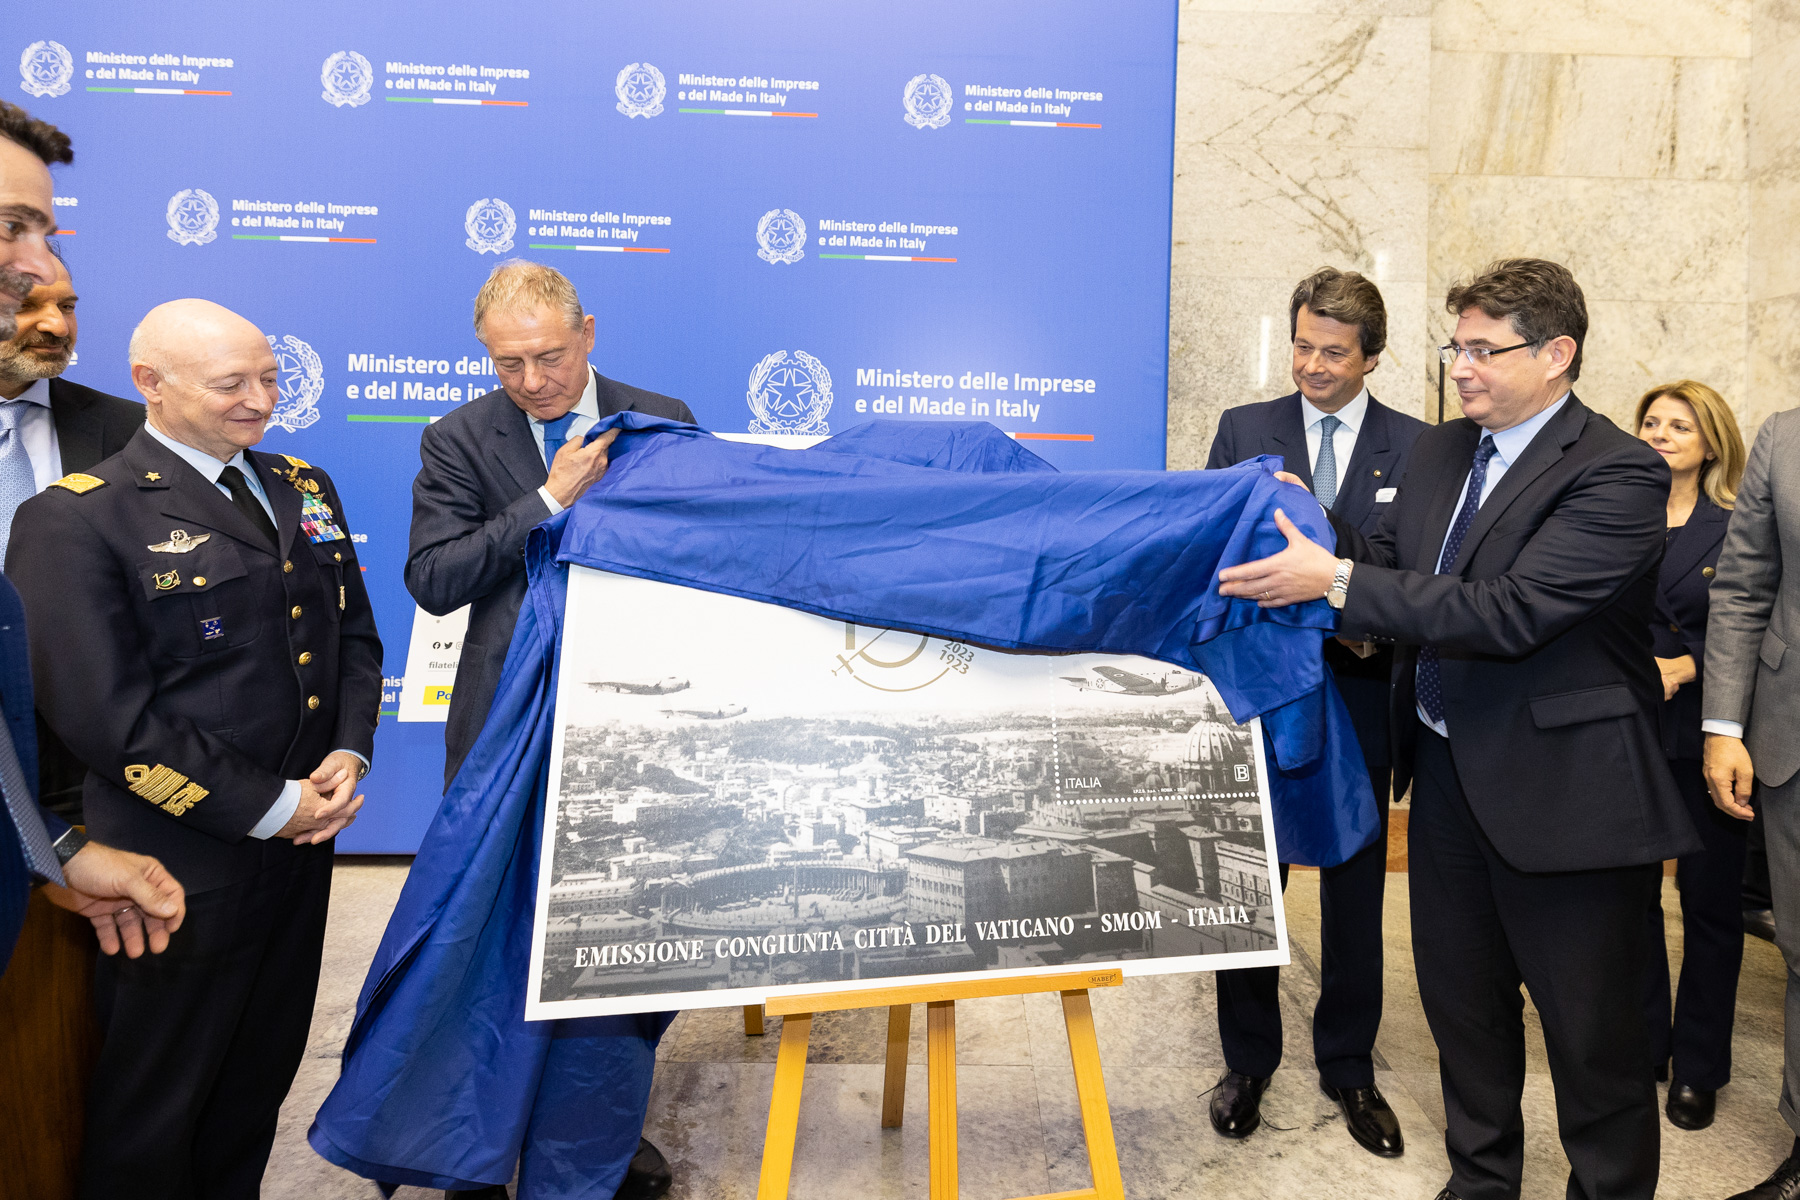 Joint philatelic issue ceremony with the Italian Air Force